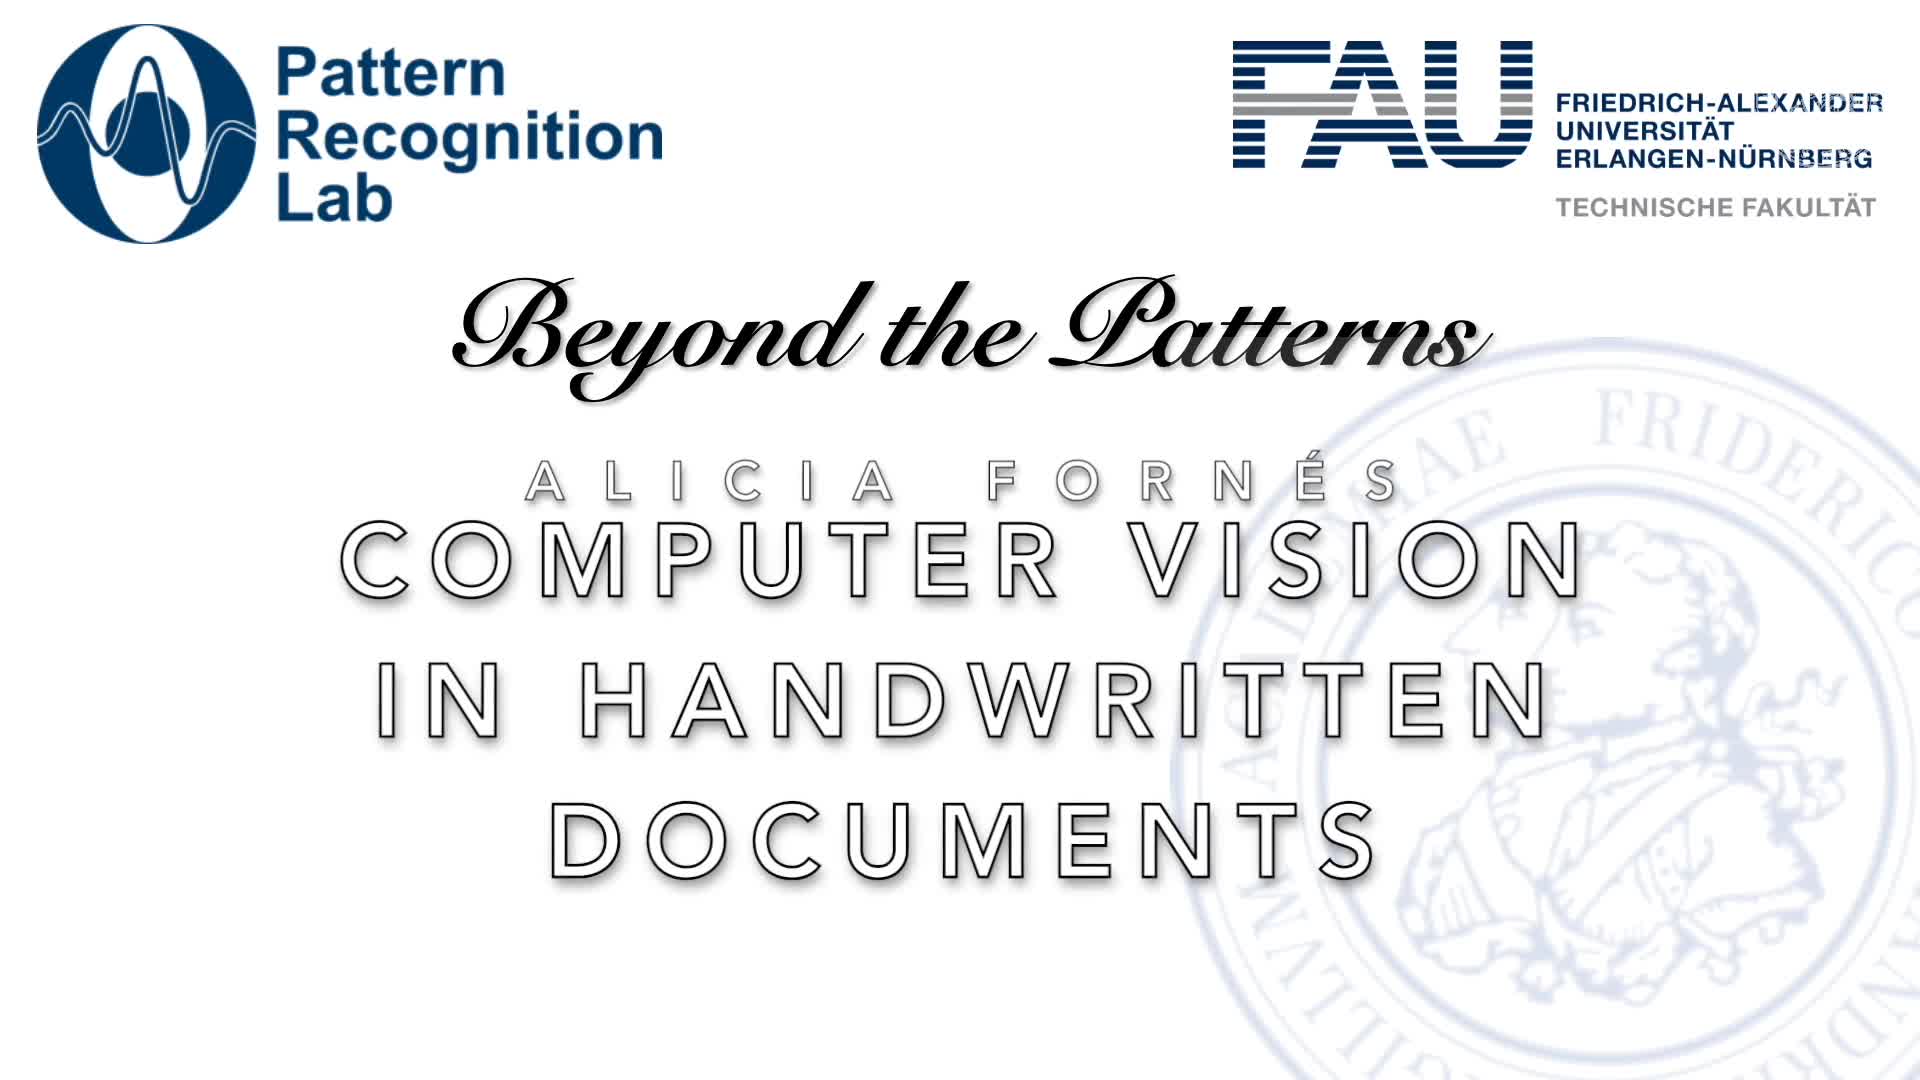 Beyond the Patterns - Alicia Fornés - Computer Vision for Handwritten Document Analysis preview image